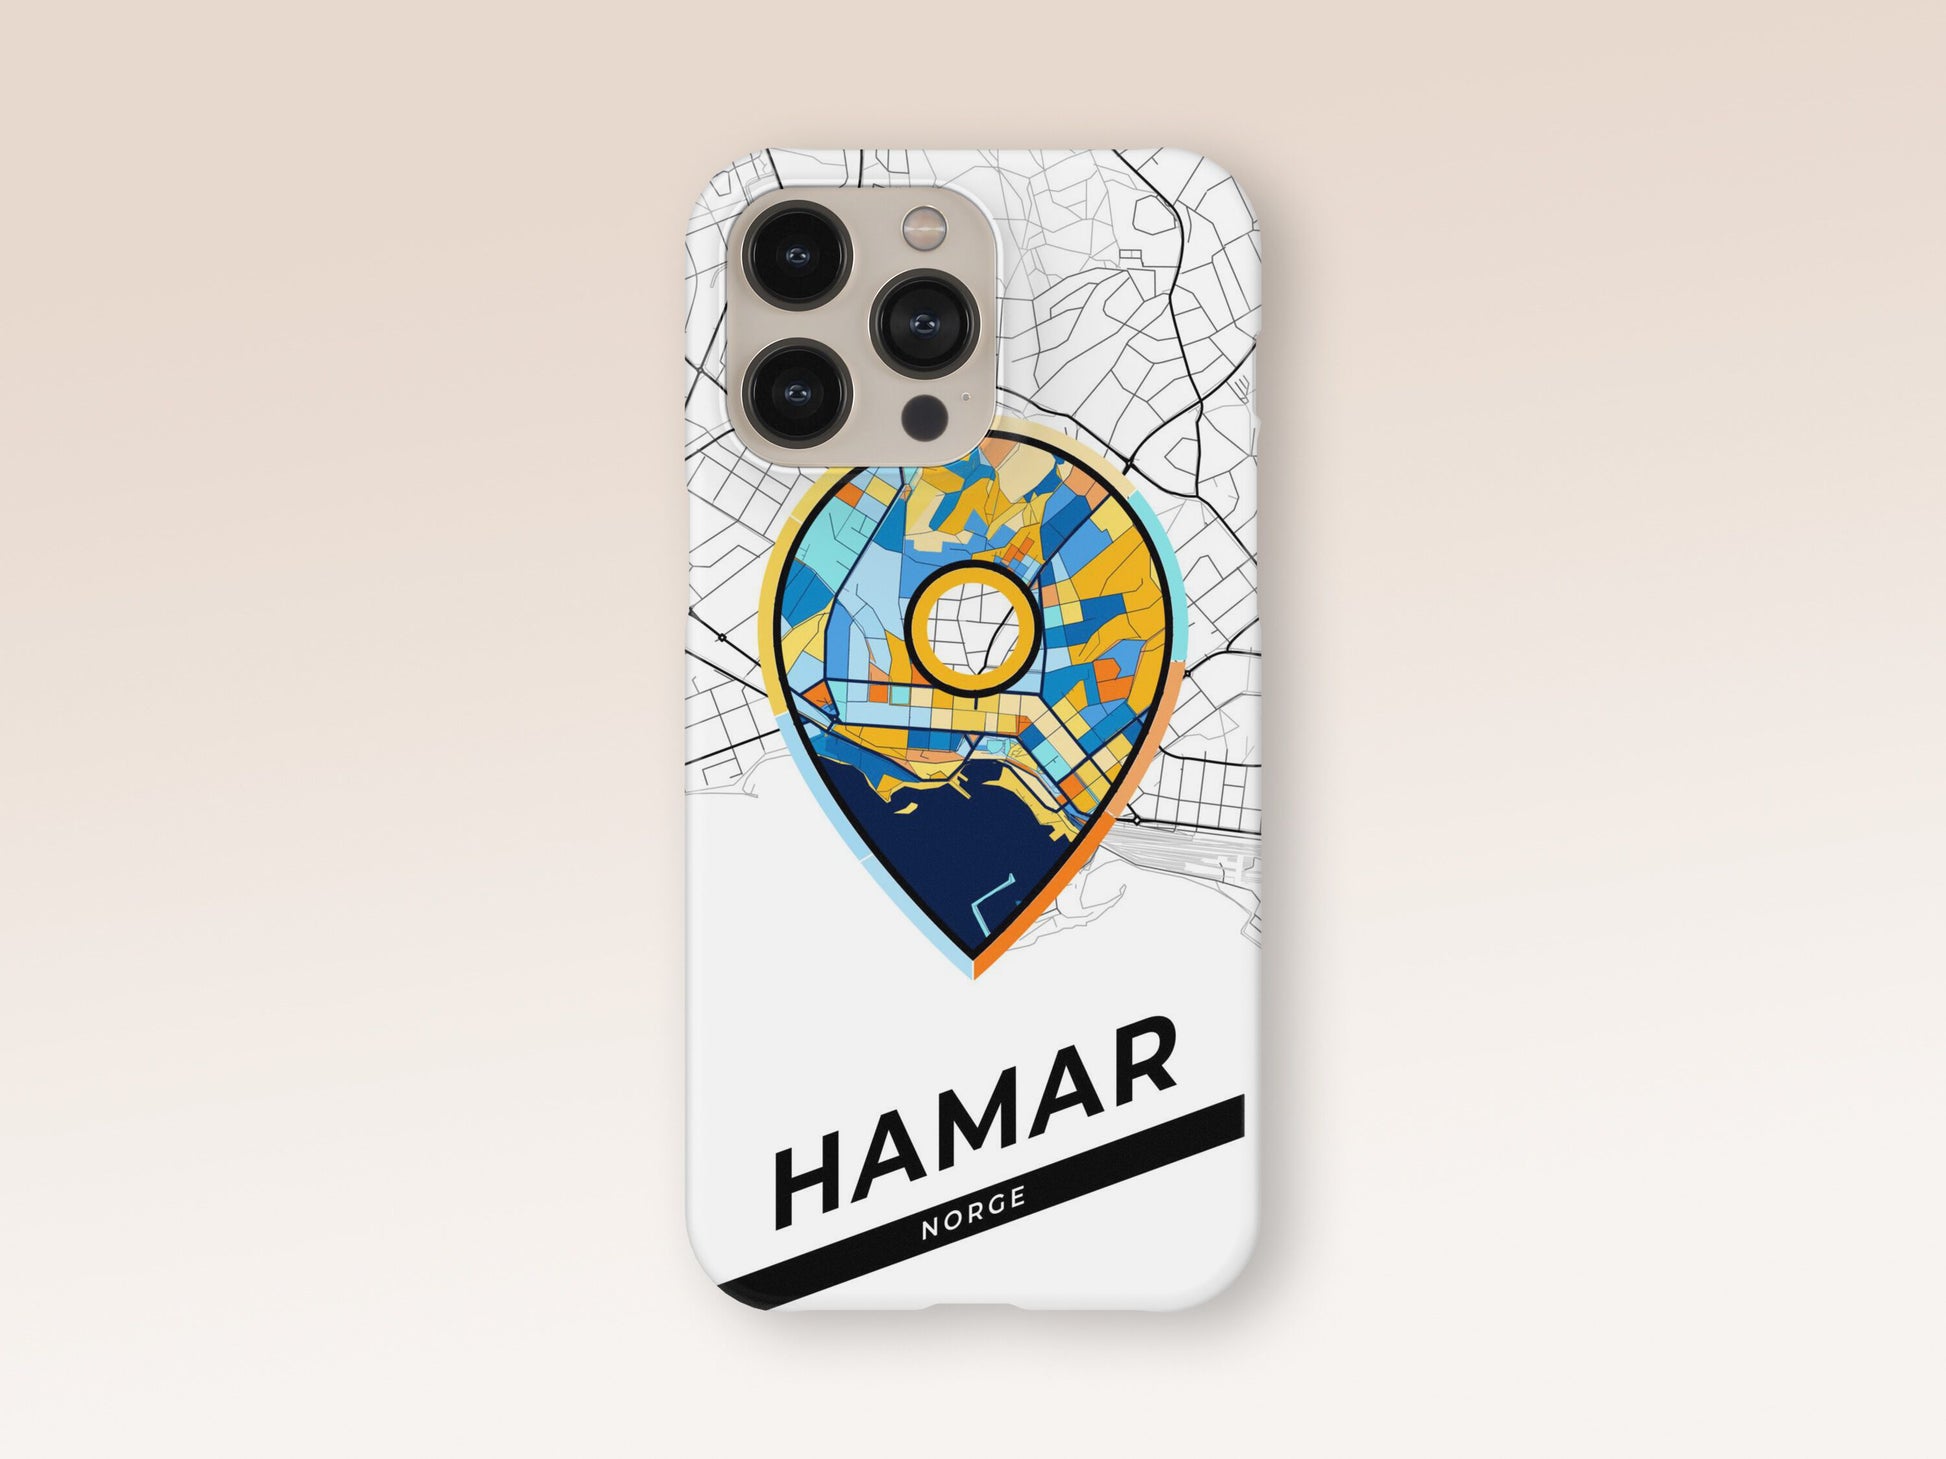 Hamar Norway slim phone case with colorful icon. Birthday, wedding or housewarming gift. Couple match cases. 1